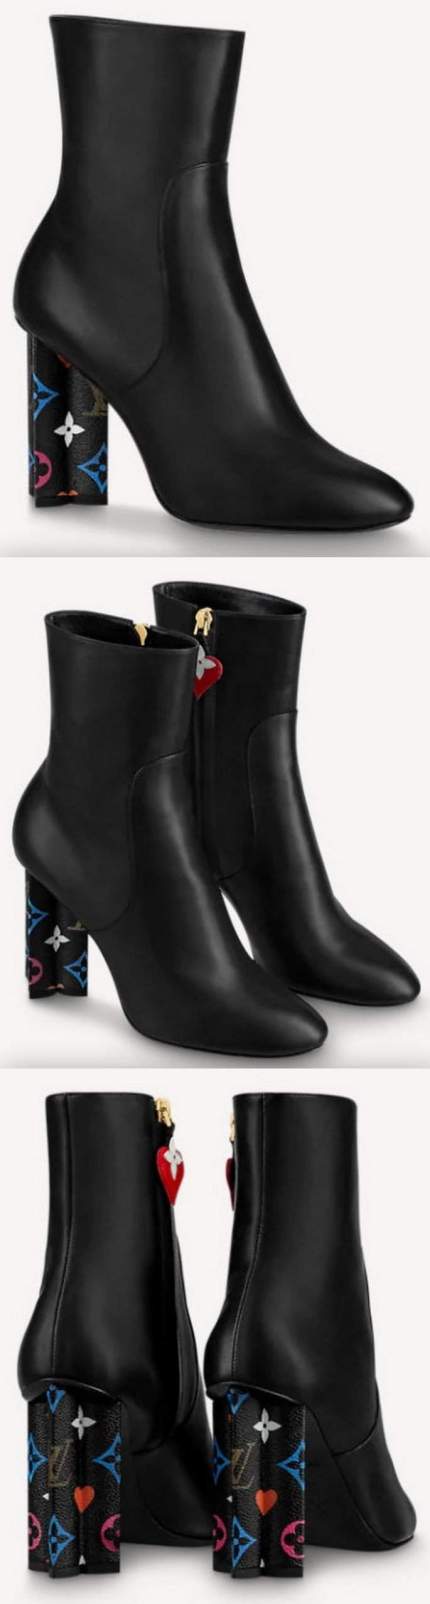 'Game On' Silhouette Ankle Boots